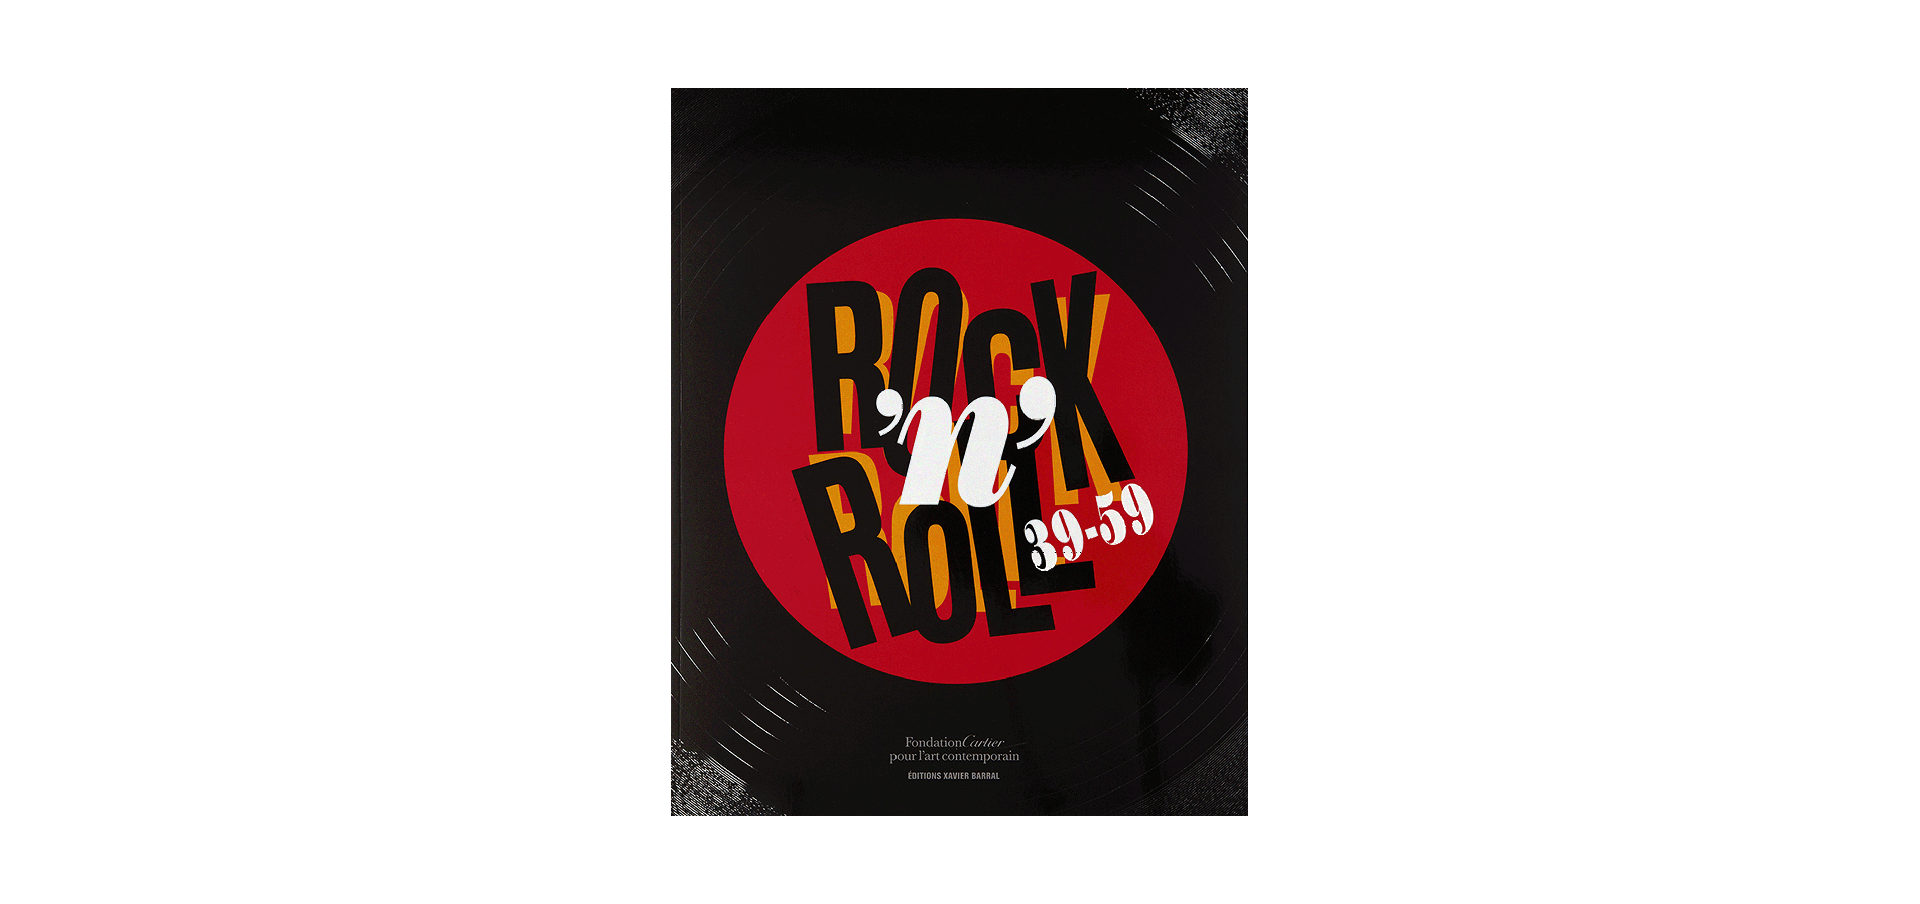 Rock’n’Roll 39-59 (sold out)